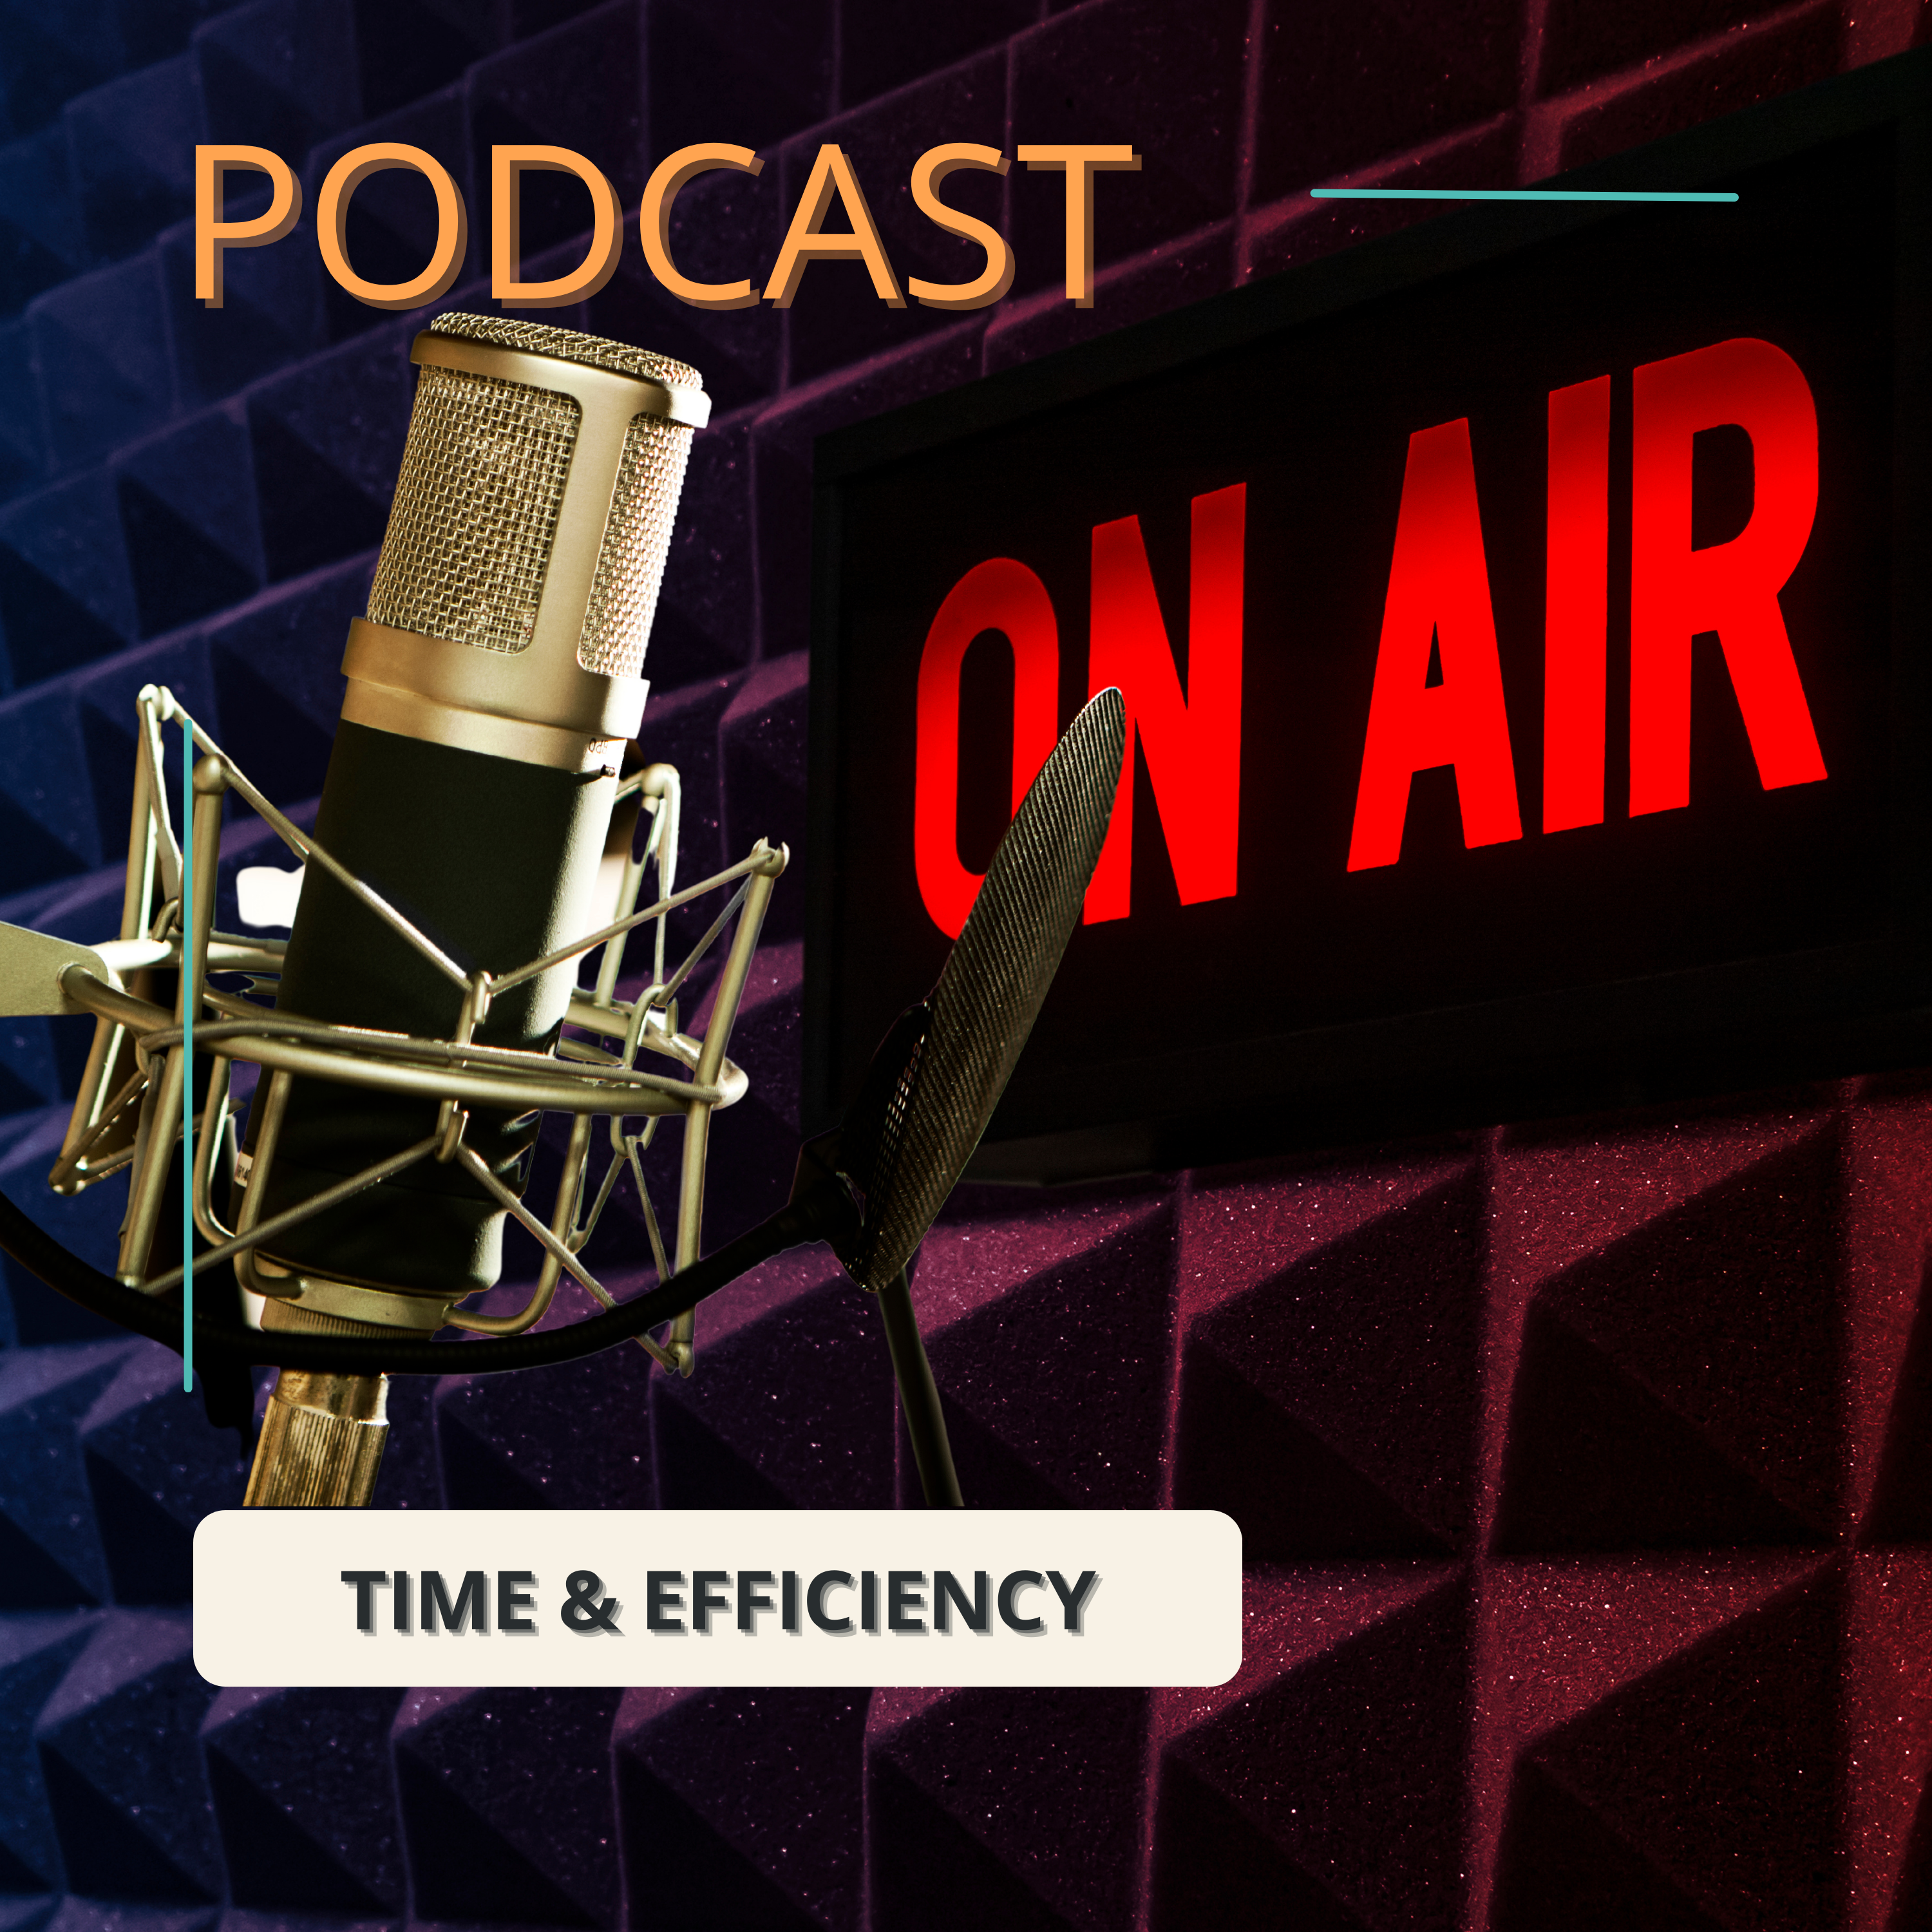 Podcast Services image describing the time & efficiency aspect of our services